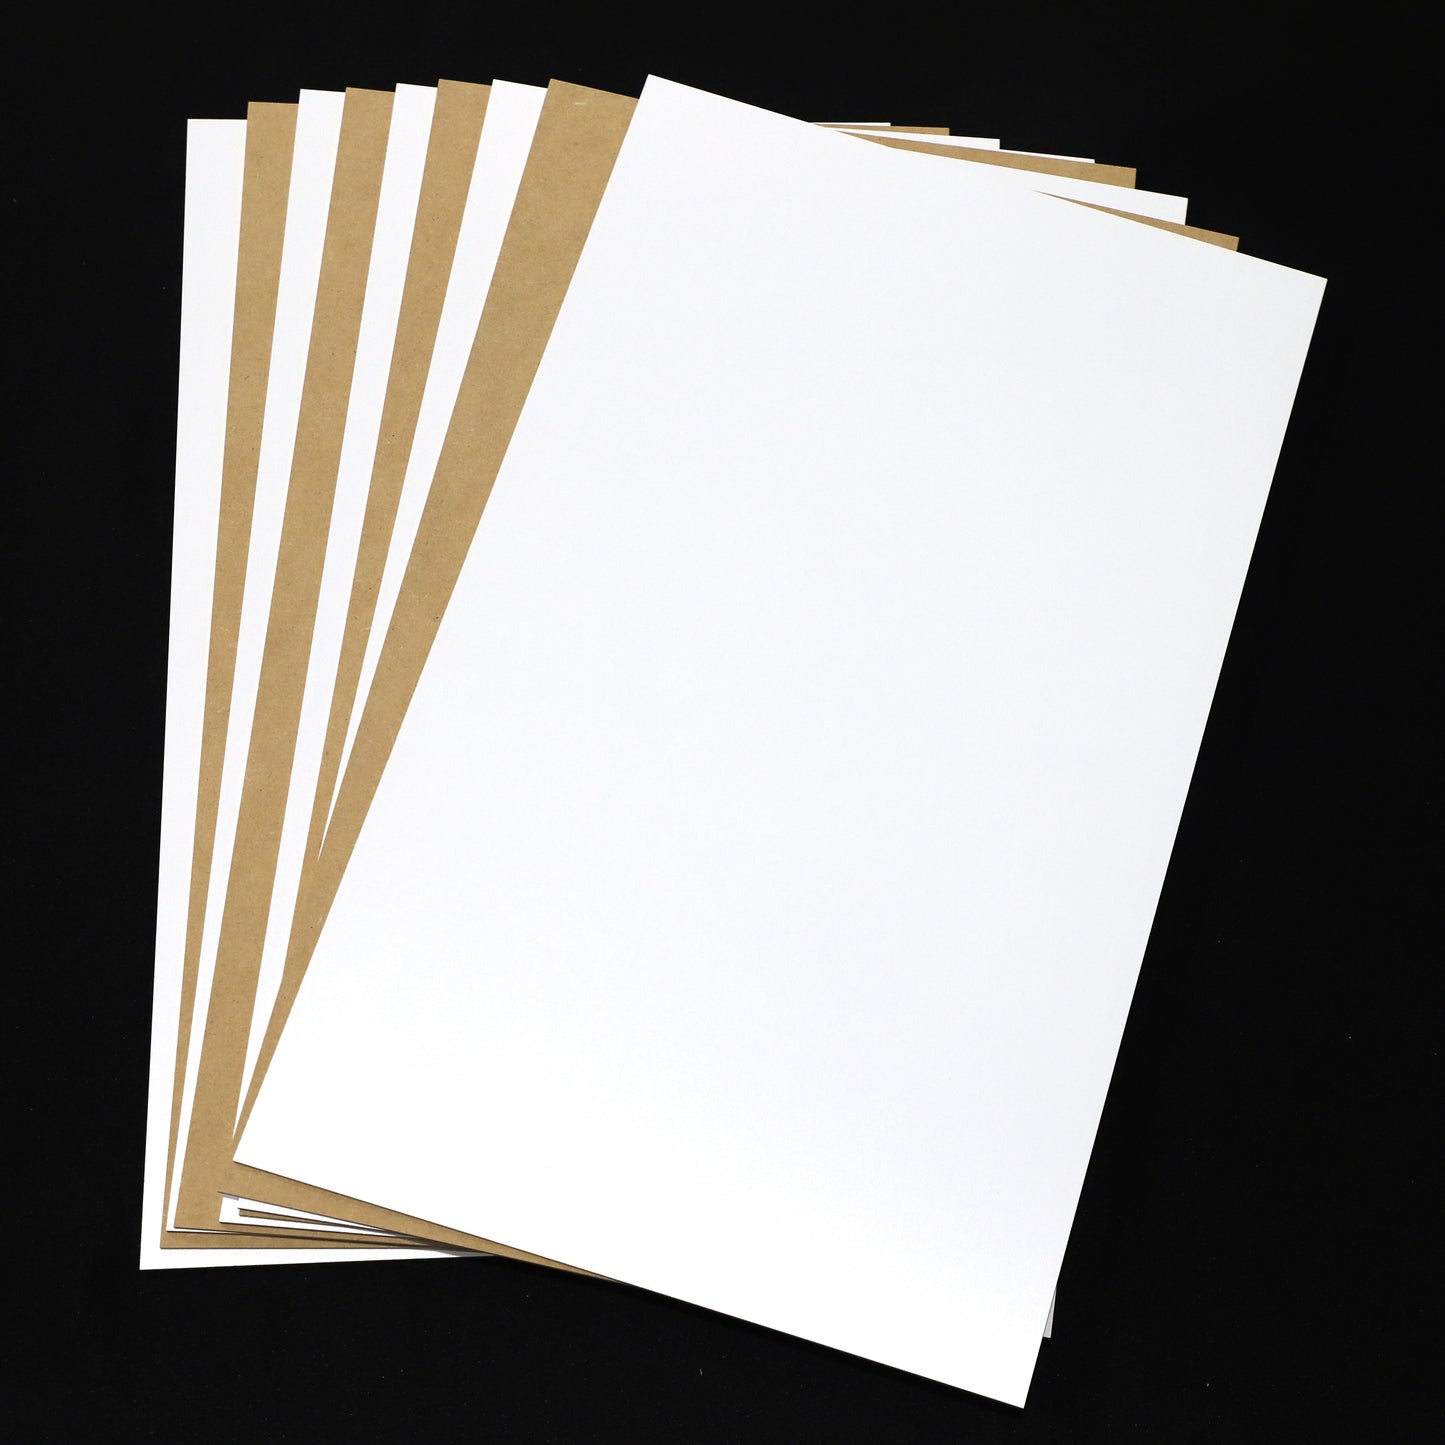 LOCAL PICK UP ONLY - 1/8" Premium White Single-Sided MDF Draft Board 15.75" x 29.75"